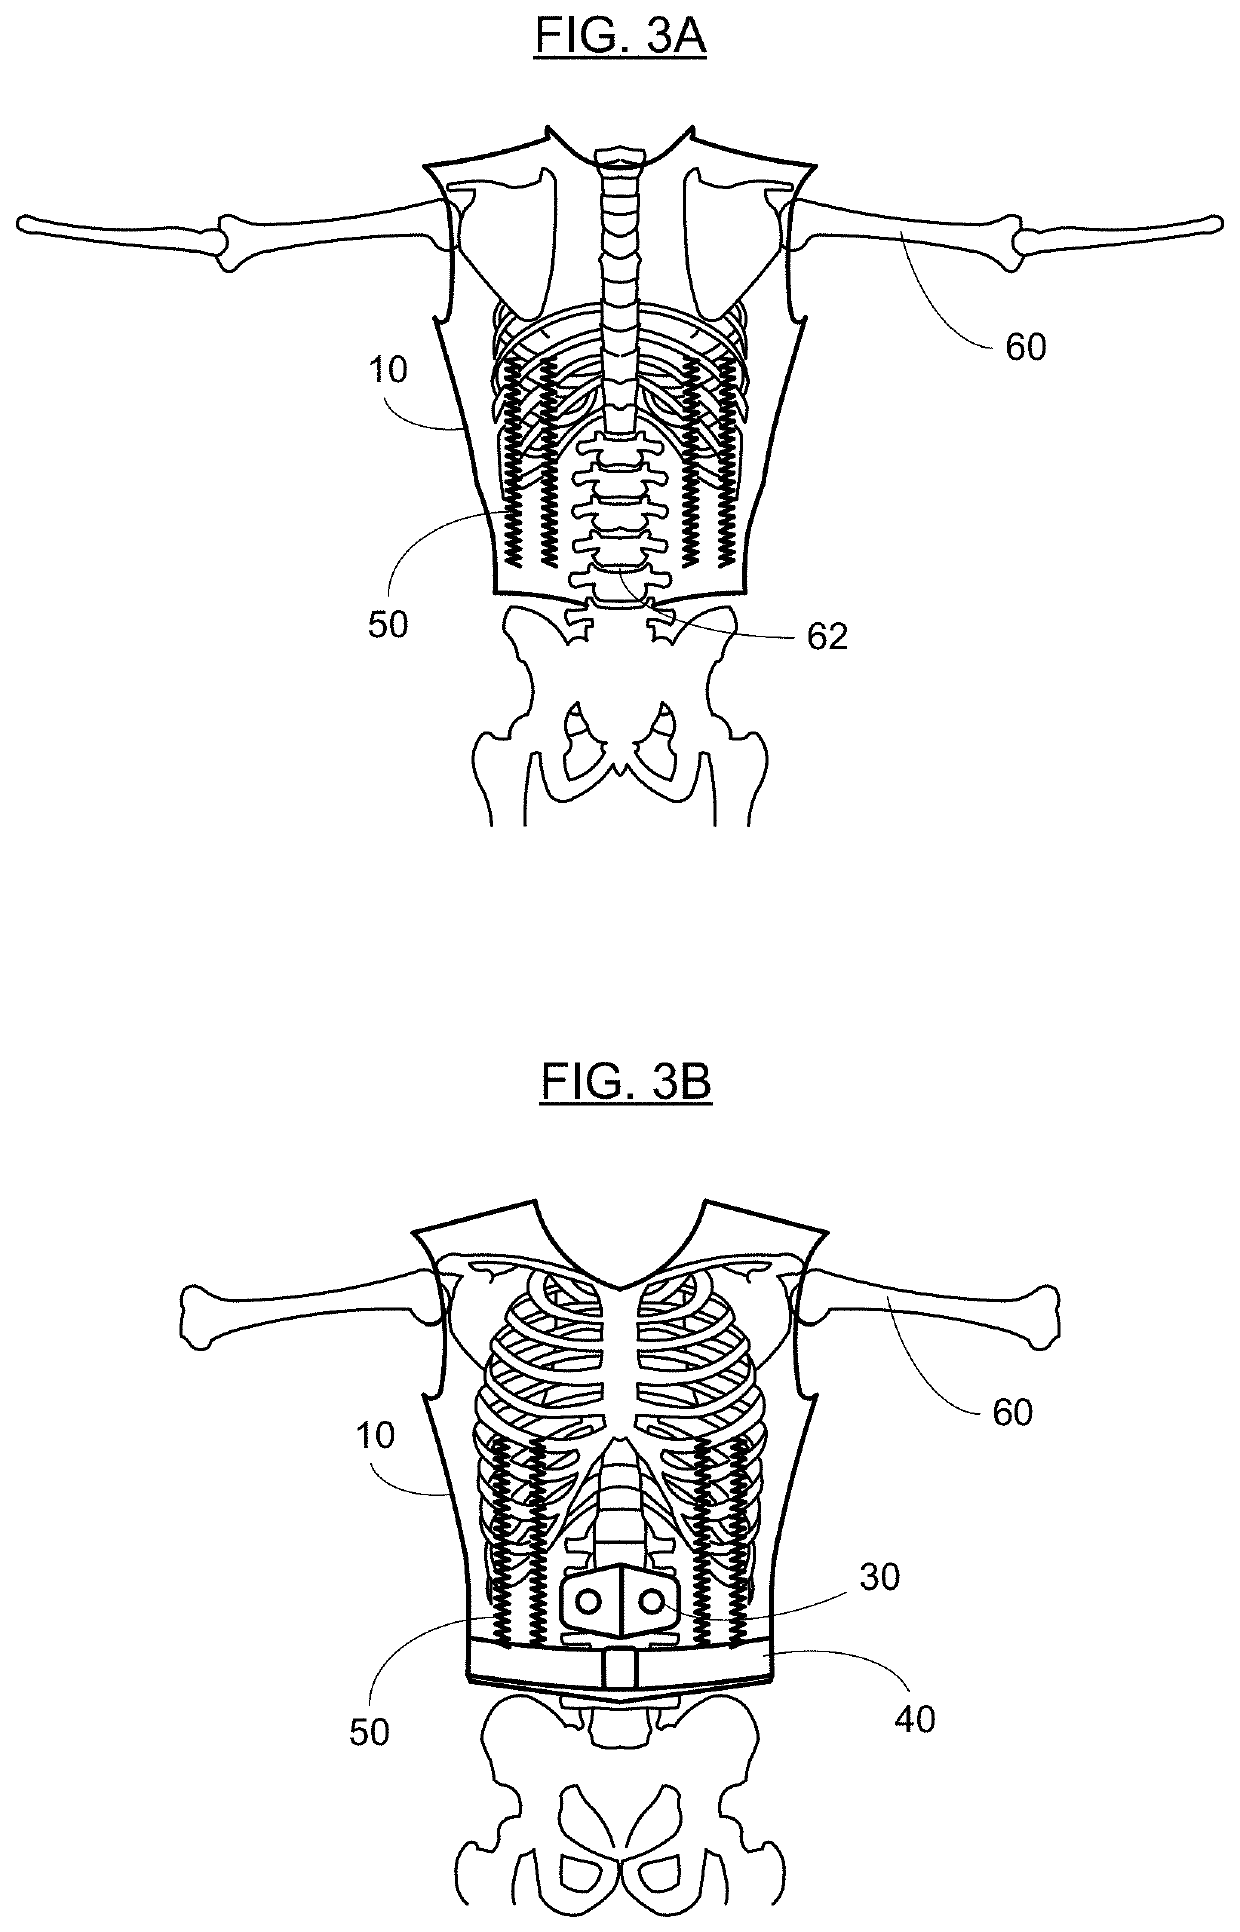 Braces for alleviating compression and methods of making and using the same